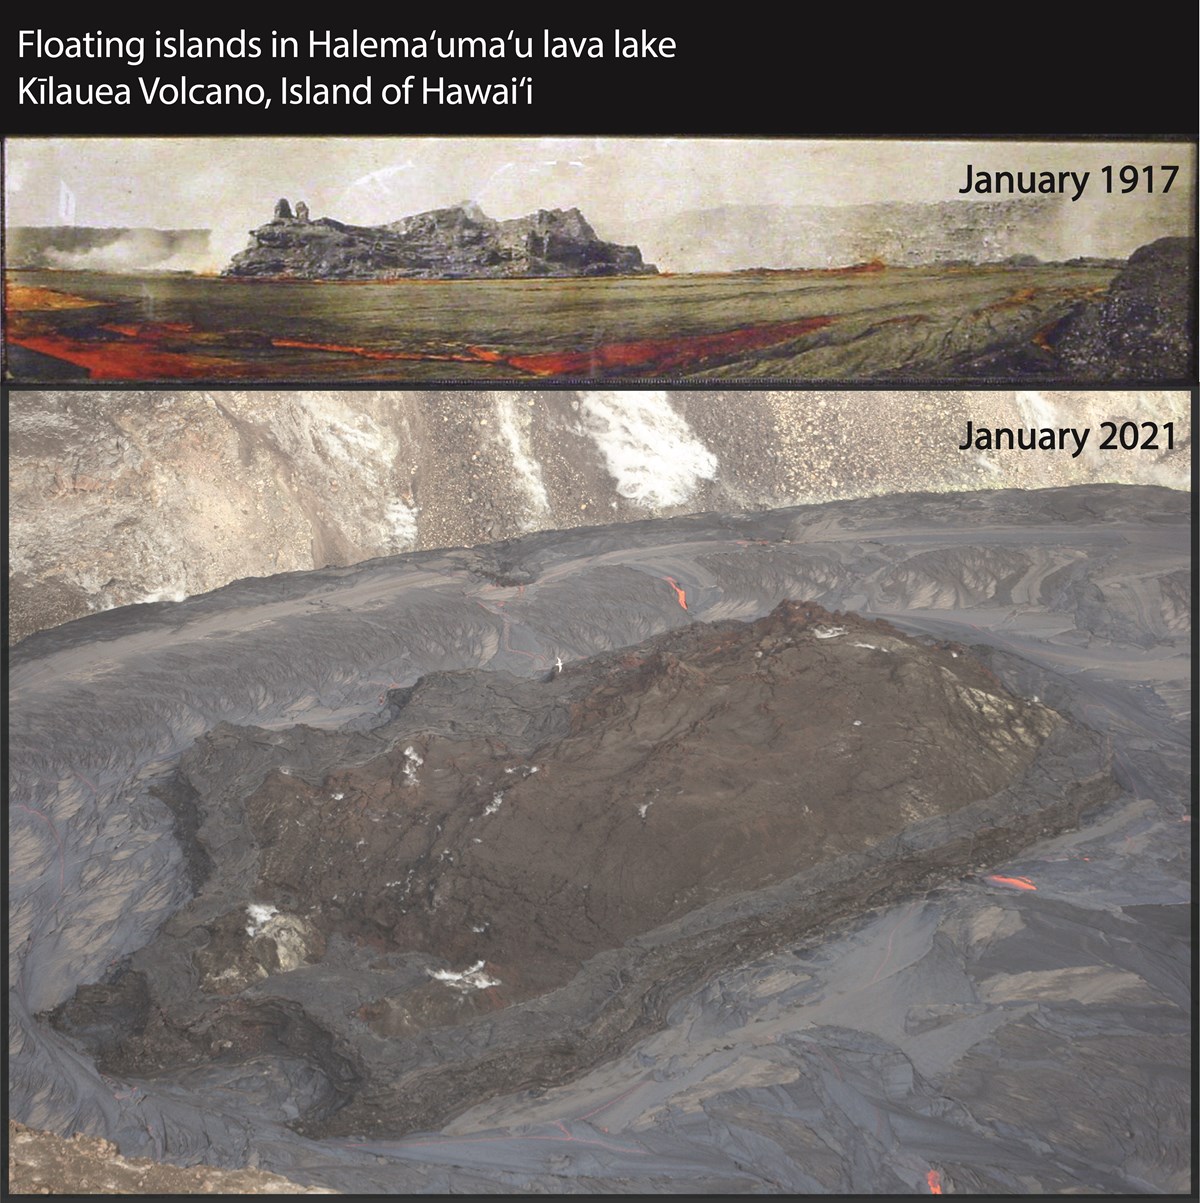 photo illustration of floating islands of hardened lava on a lava lake shown in 1917 and 2021